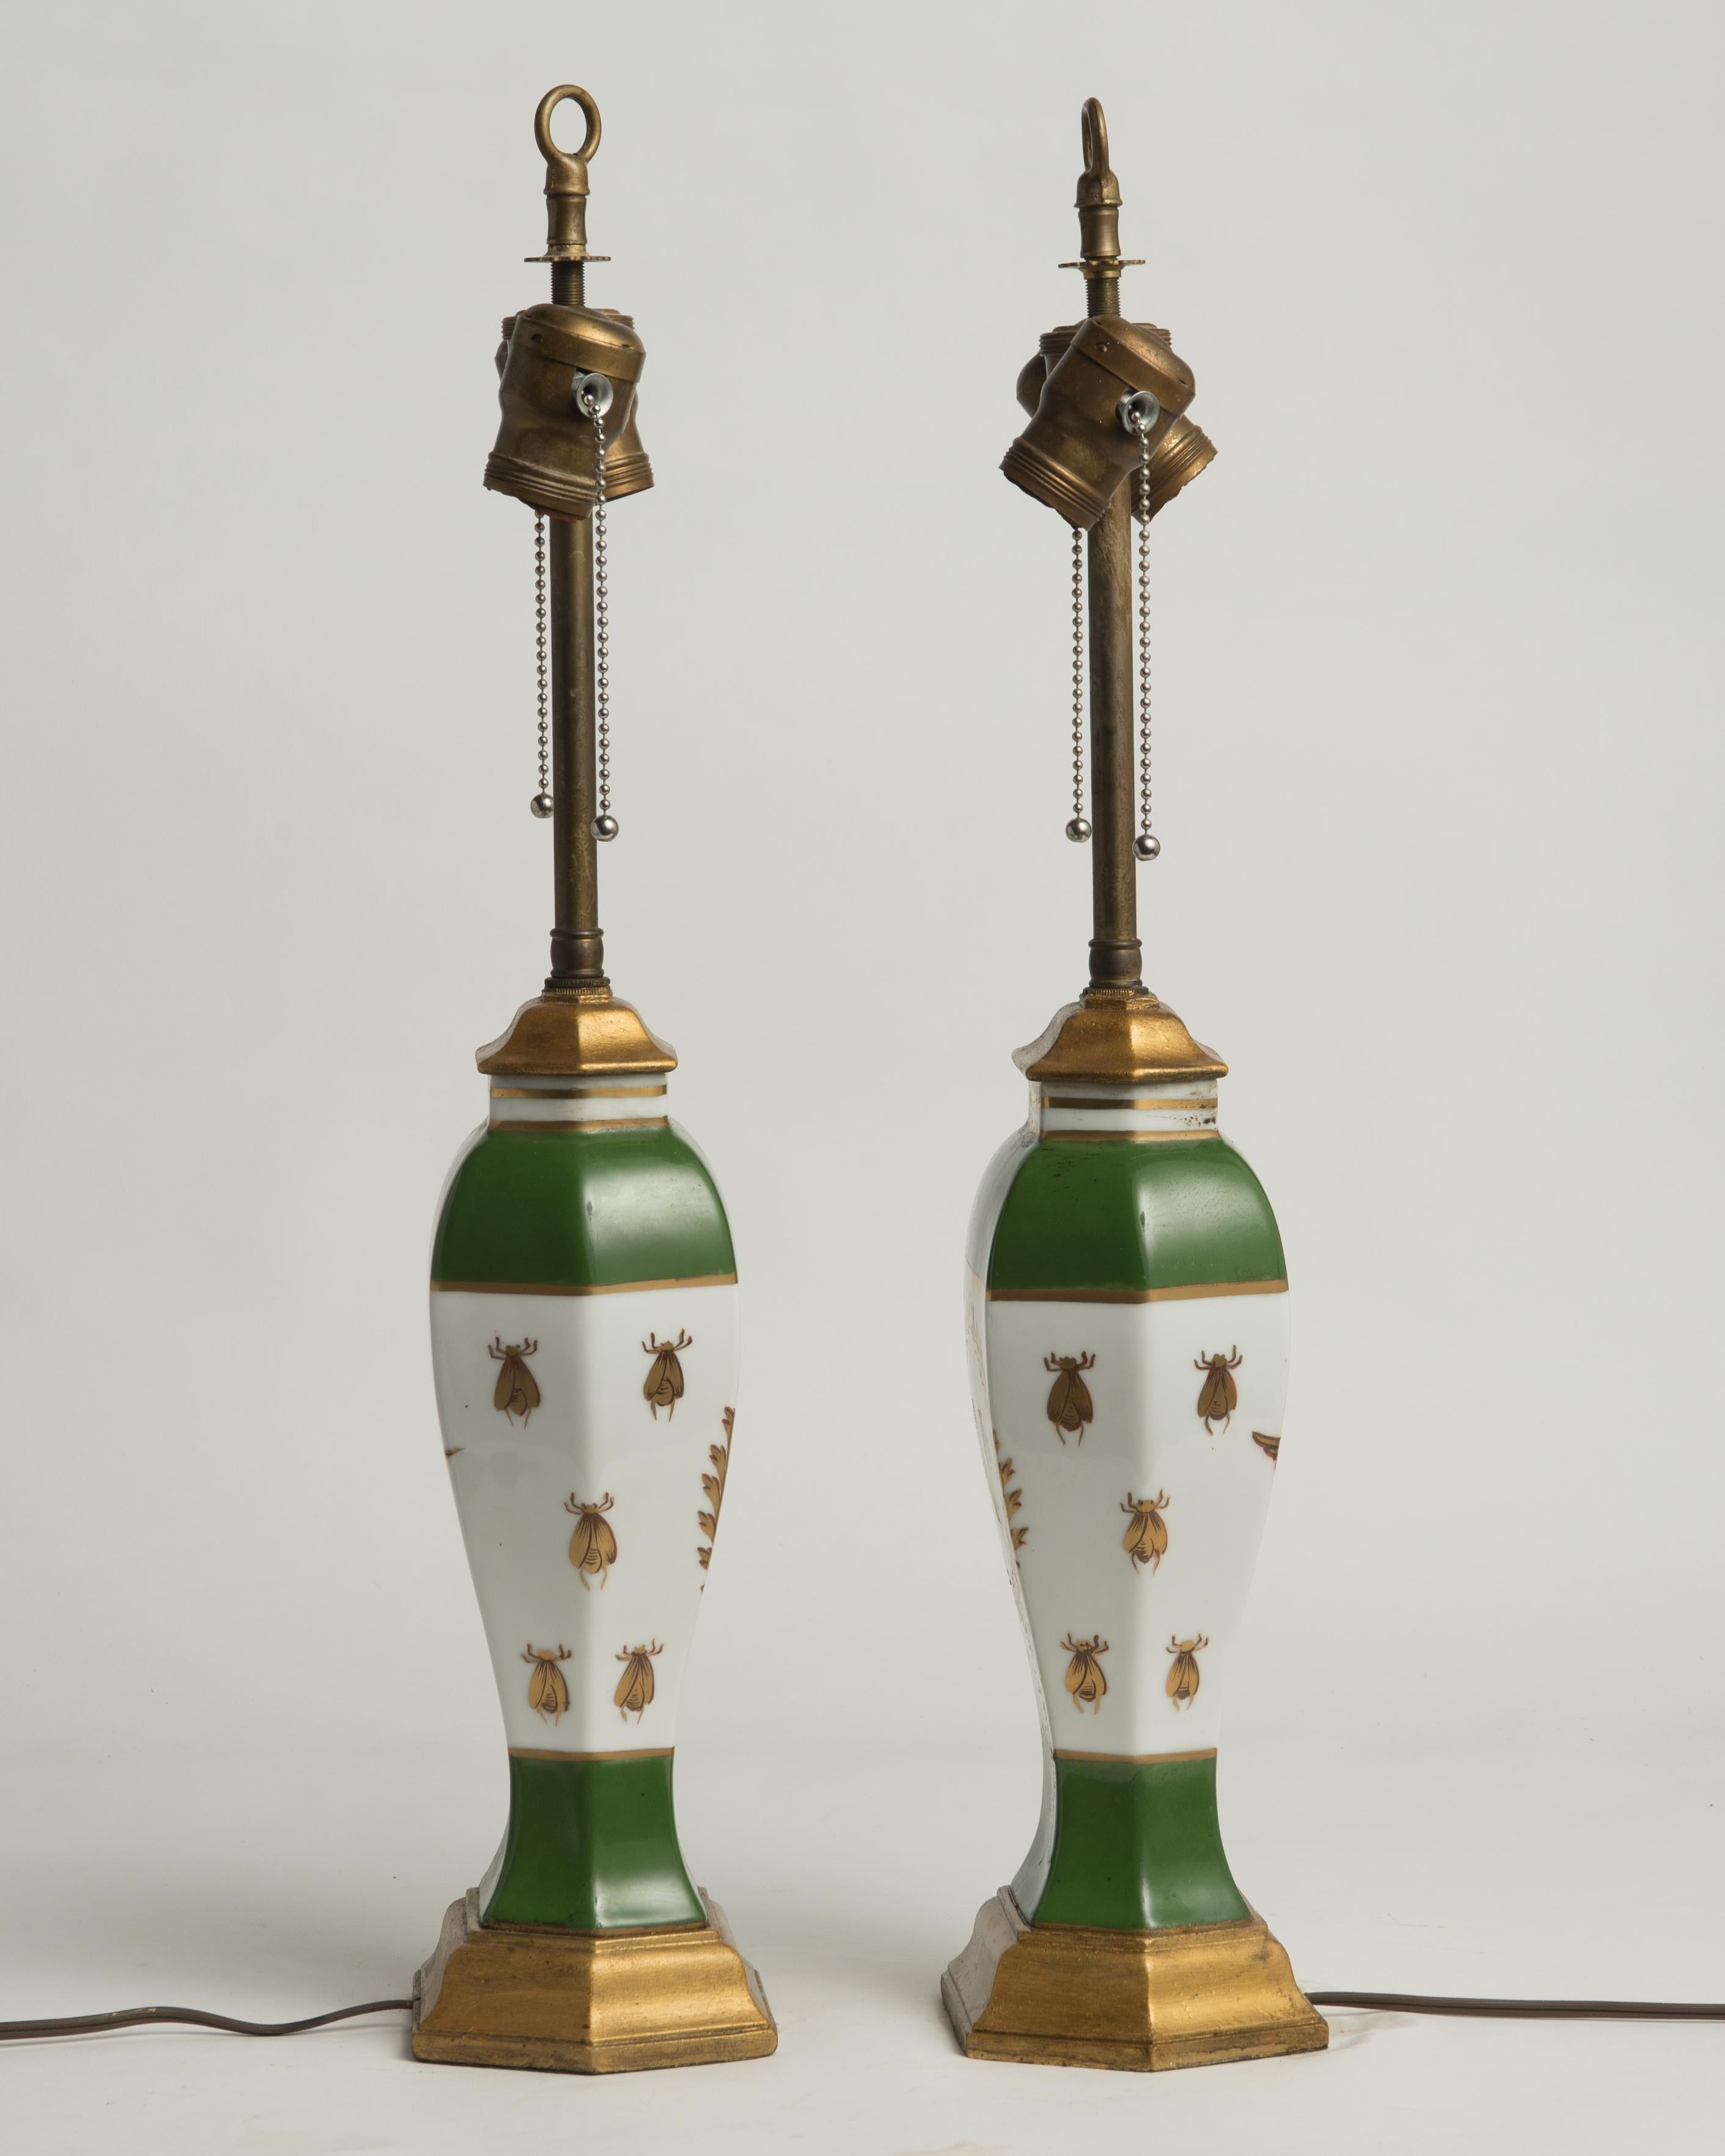 Napoleon III Late 19th Century French Napoleonic Lamps Style of Sèvres, a Pair